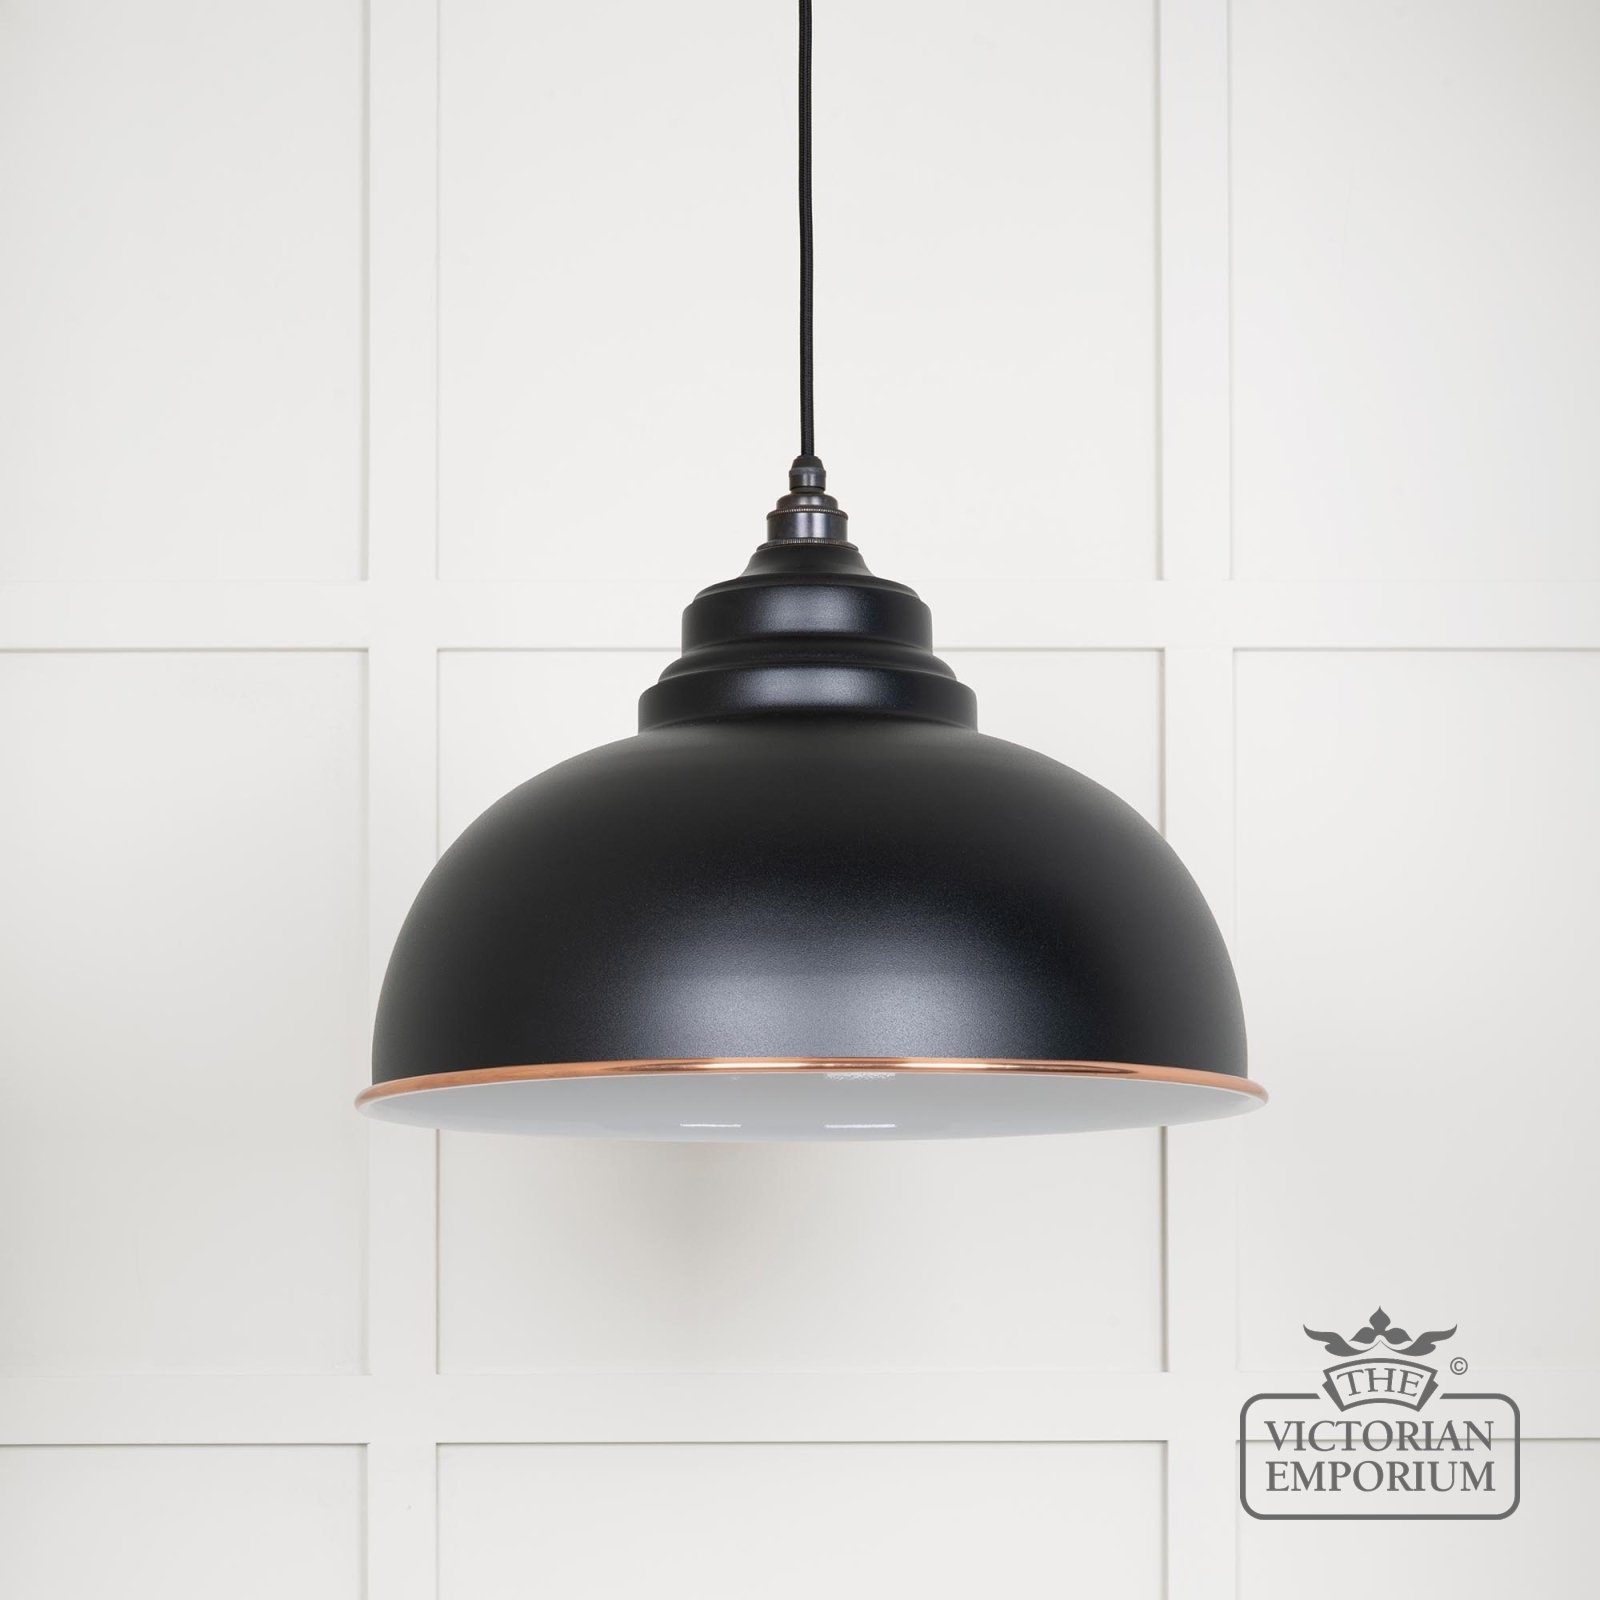 Harlow pendant light in Black with white gloss interior